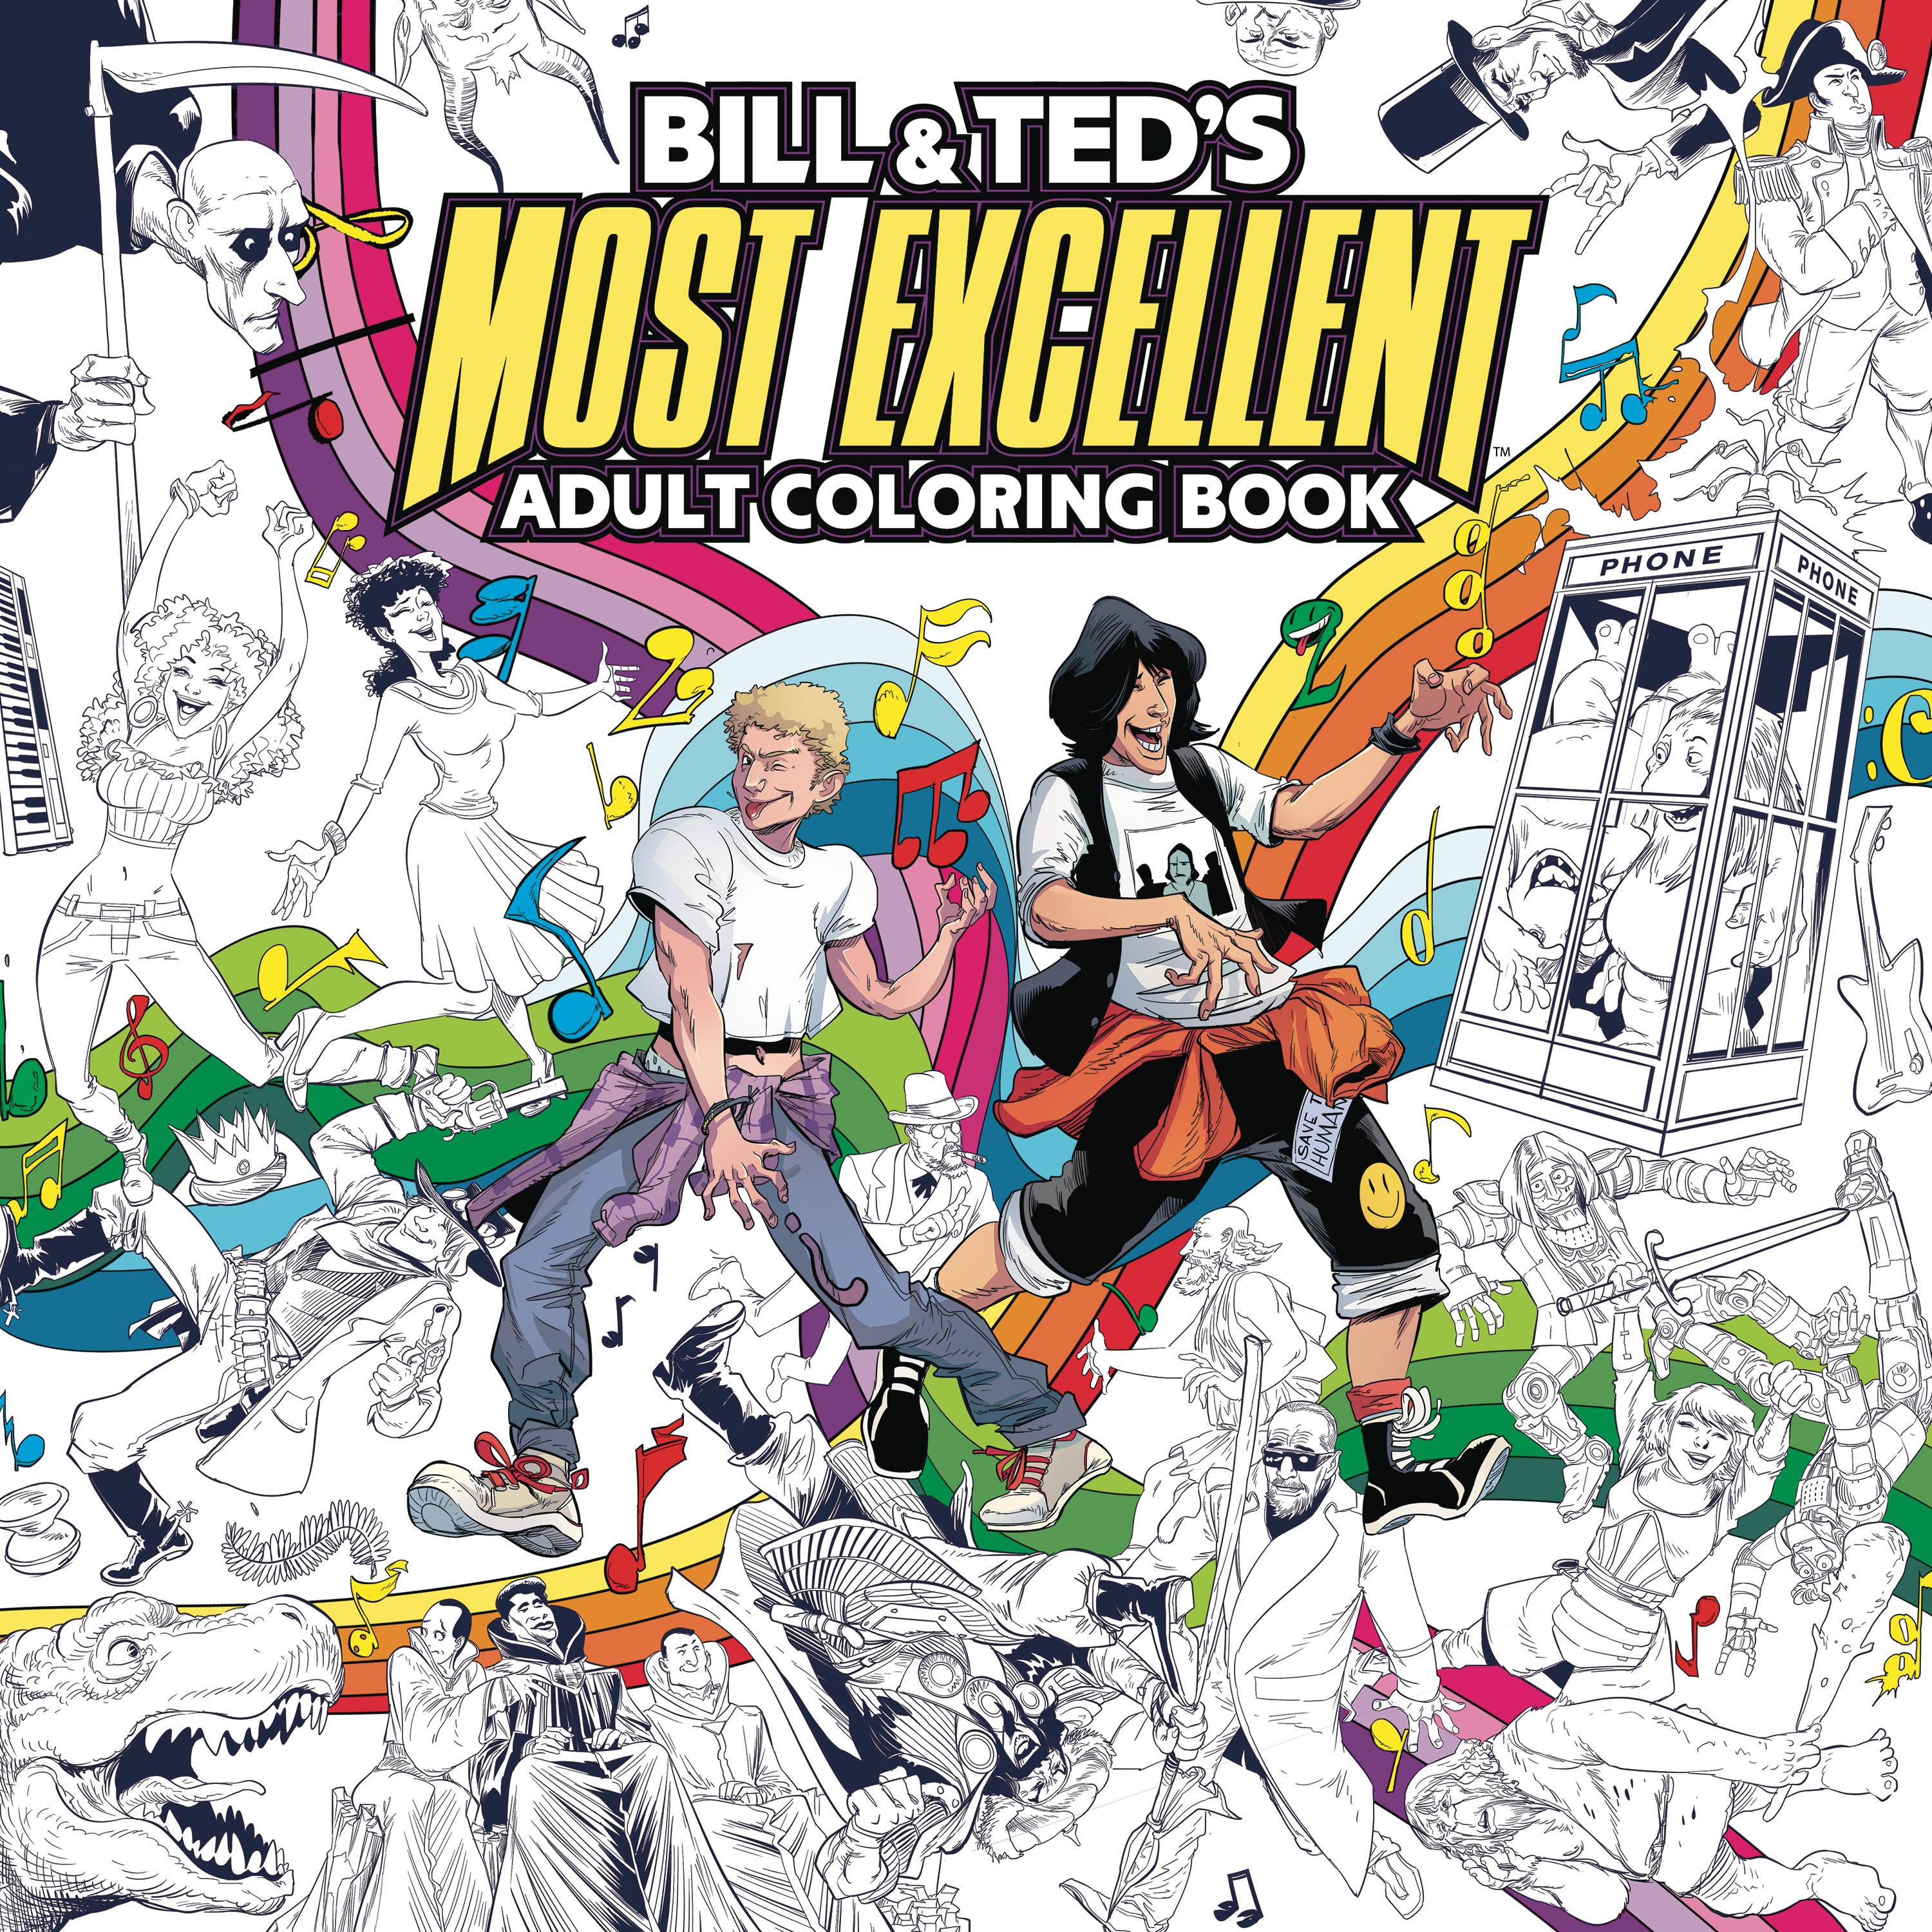 Bill & Ted Most Excellent Adult Coloring Book Soft Cover